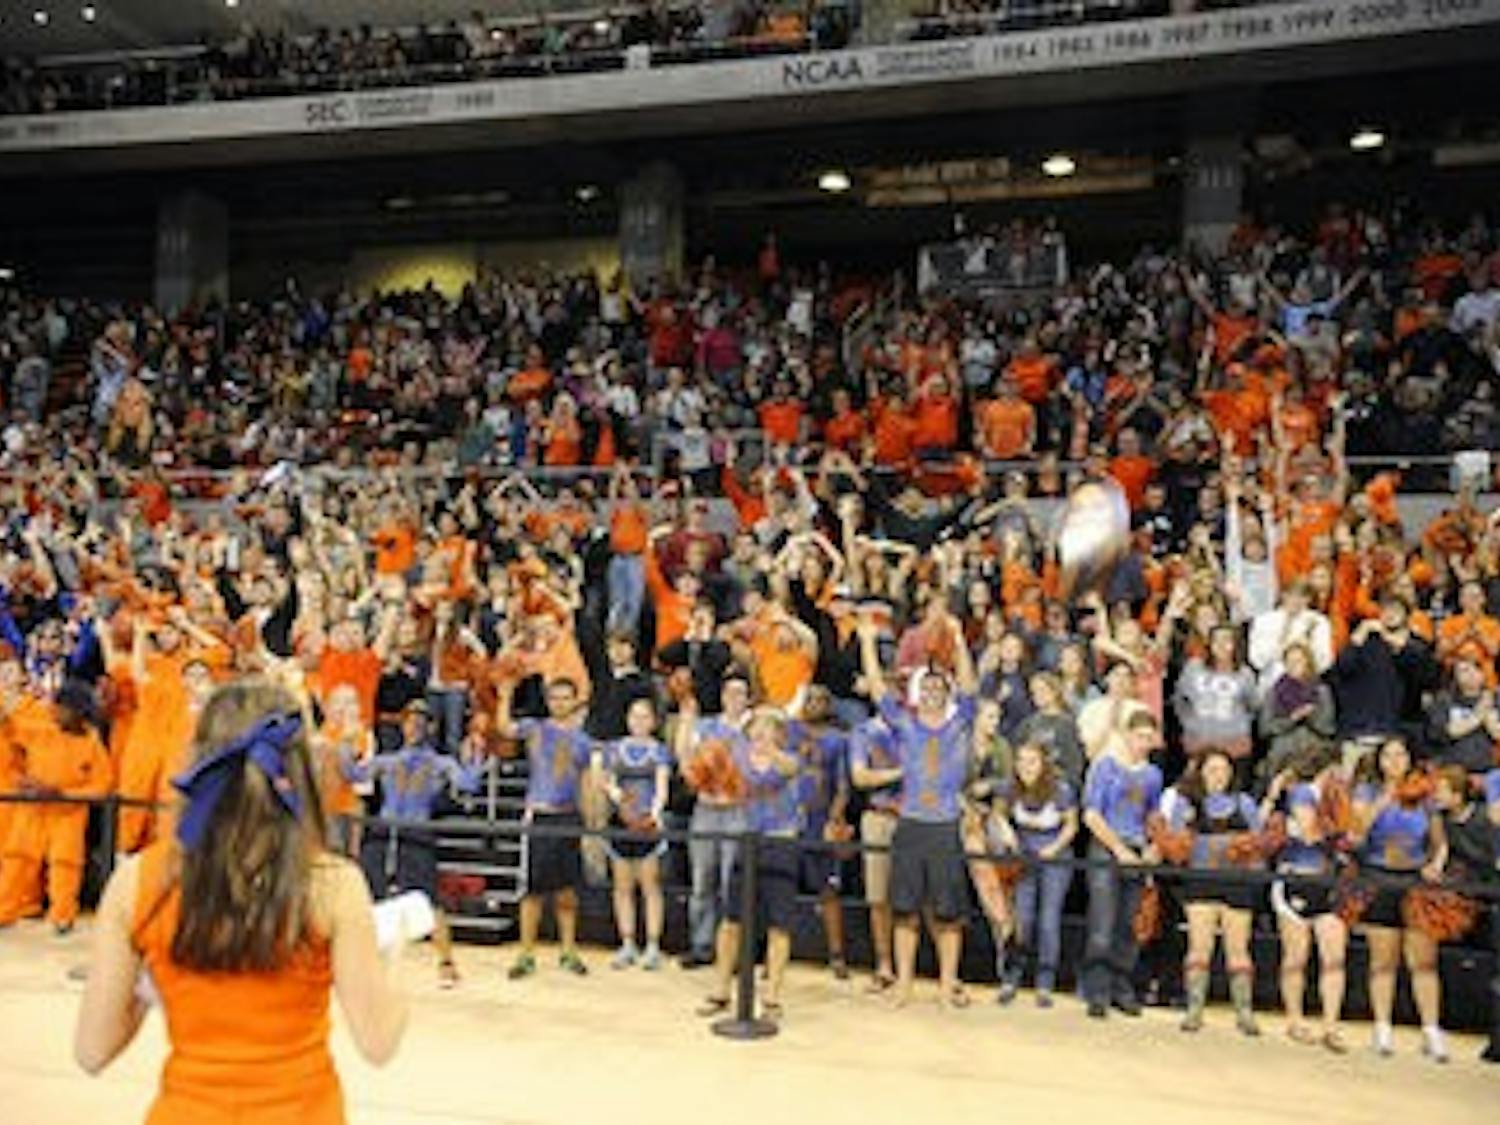 Cheering students show their support for Auburn gymnastics at Friday's meet against the University of Alabama. (Courtesy of Todd Van Emst)